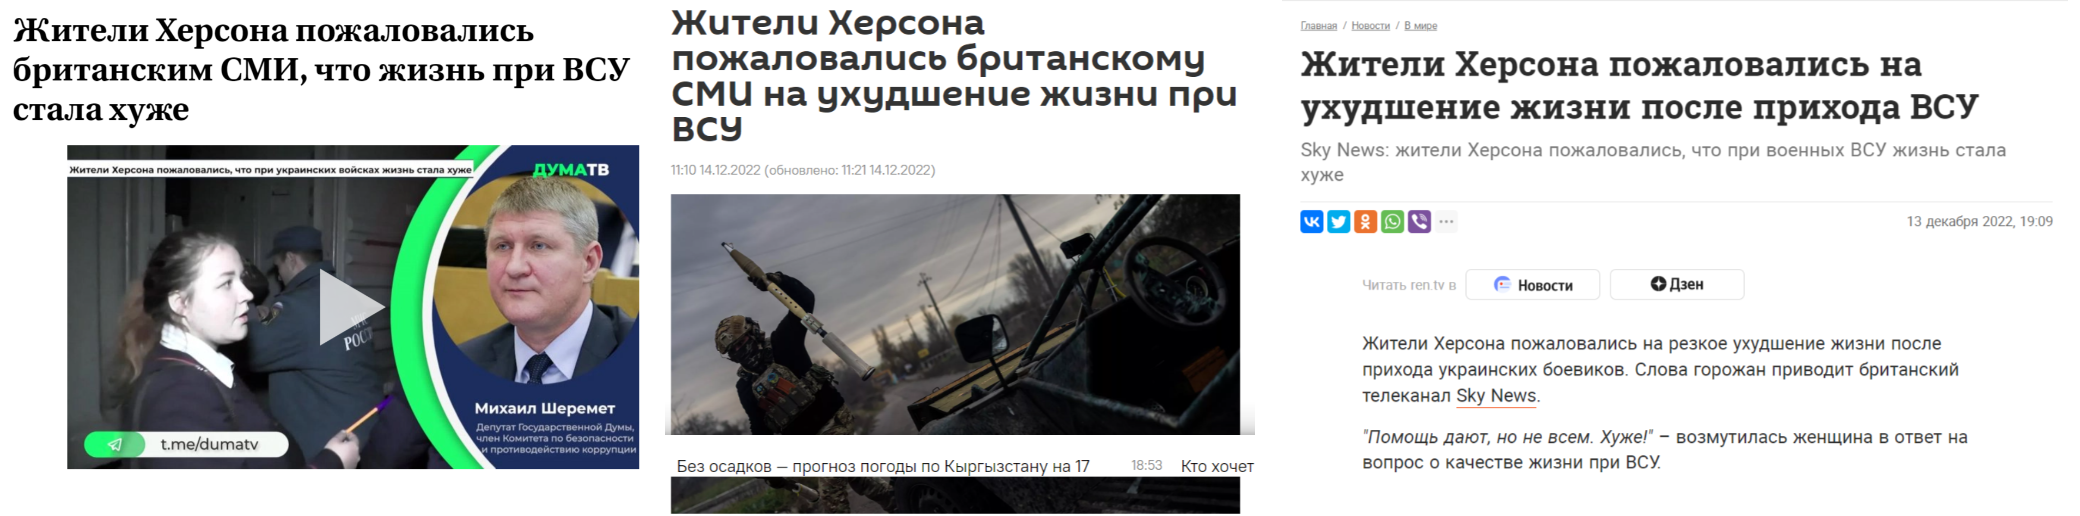 sphdeeph How does the Kremlin Media Manipulate with the SkyNews Article About the Living Conditions in Kherson?